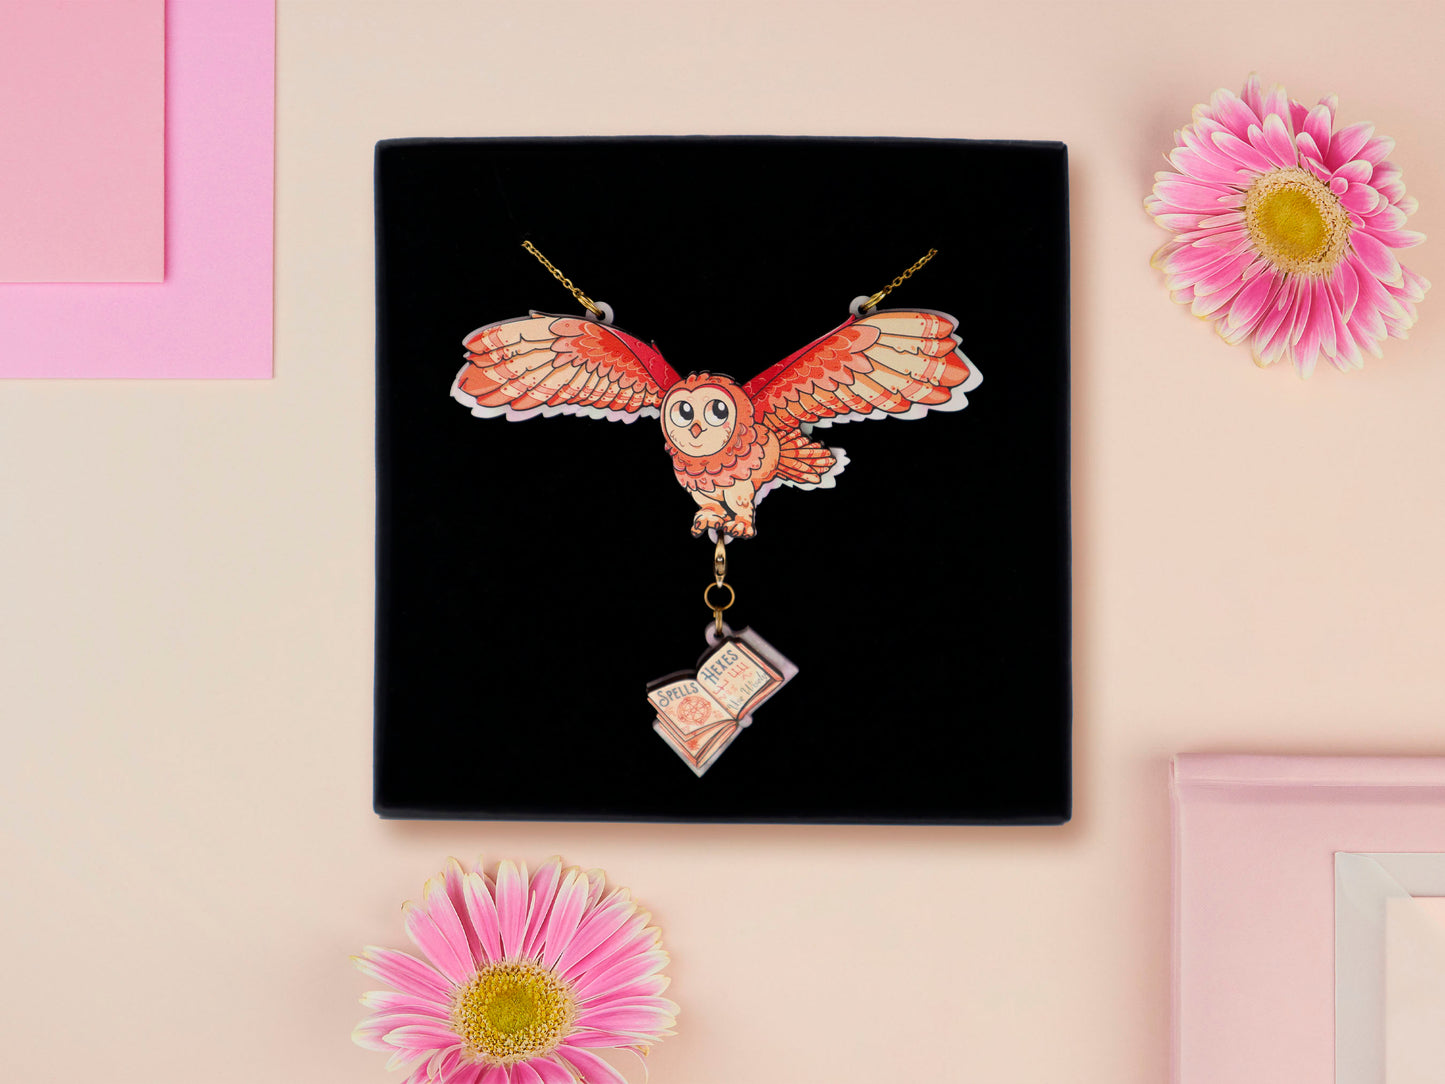 Mixed material handmade necklace of chibi cartoon flying barn owl with pearlescent wings carrying a removeable spell book charm, with a gold chain and black gift box.